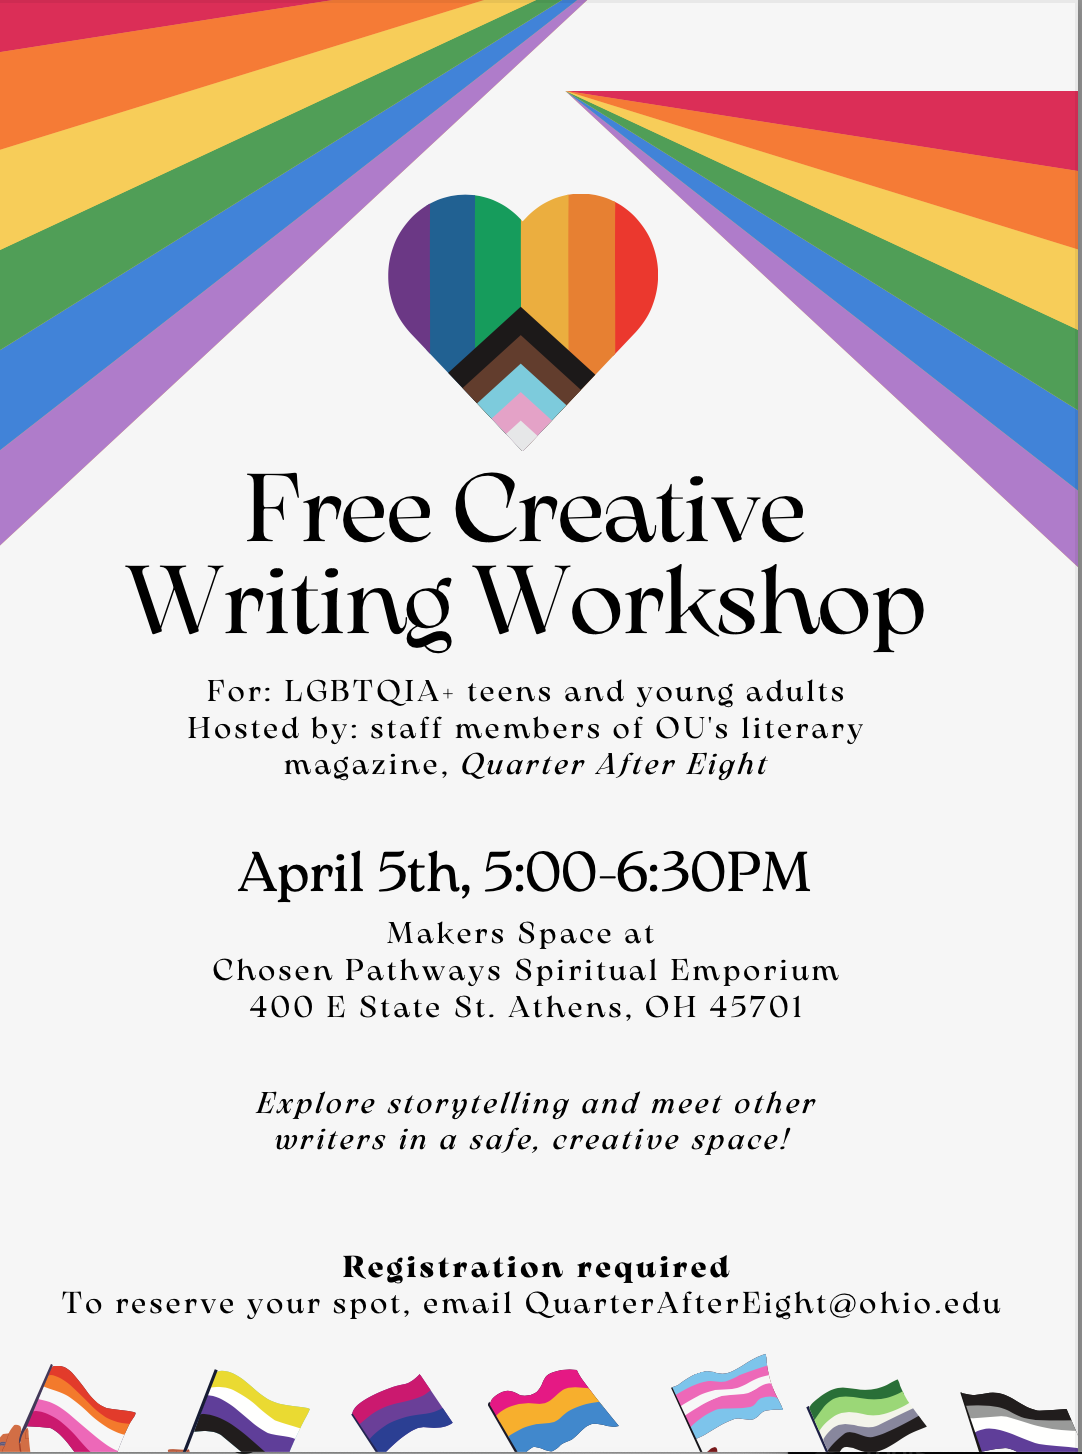 An image of the flyer for the free creative writing workshop being organized by Ohio University's litrary magazine, "Quarter After Eight."